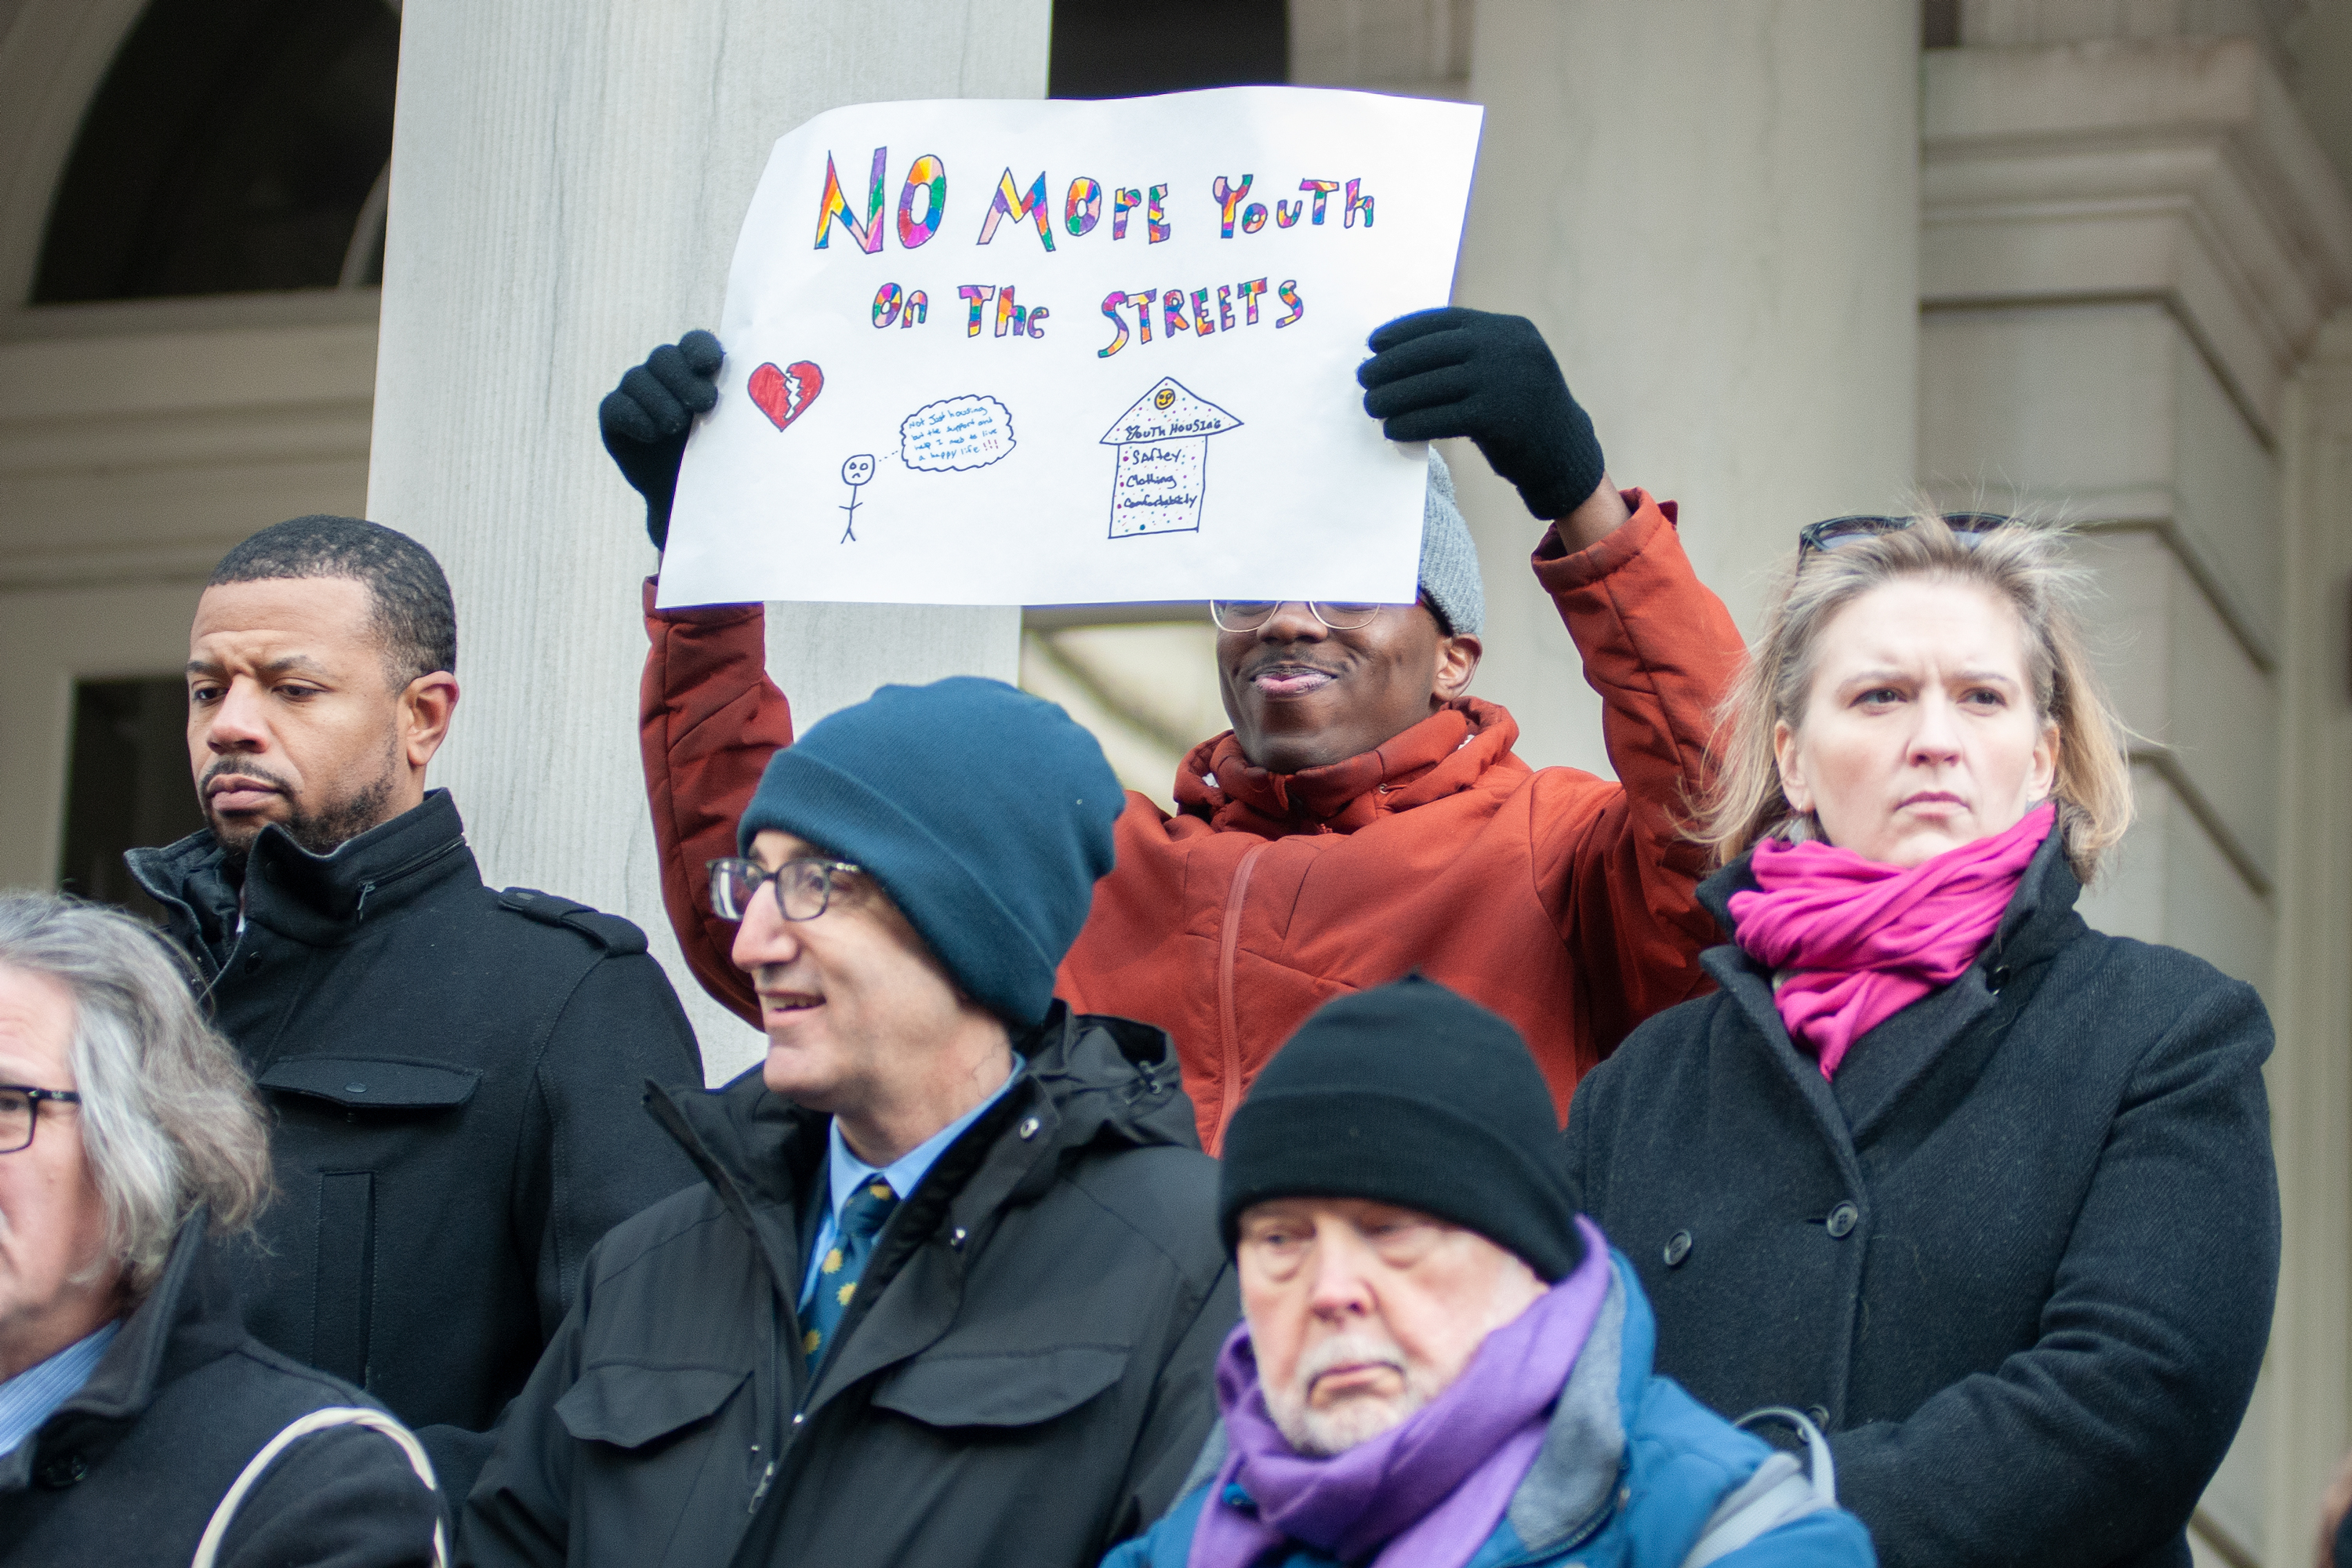 Advocates rally at City Hall in support of homeless youth. January 2020.